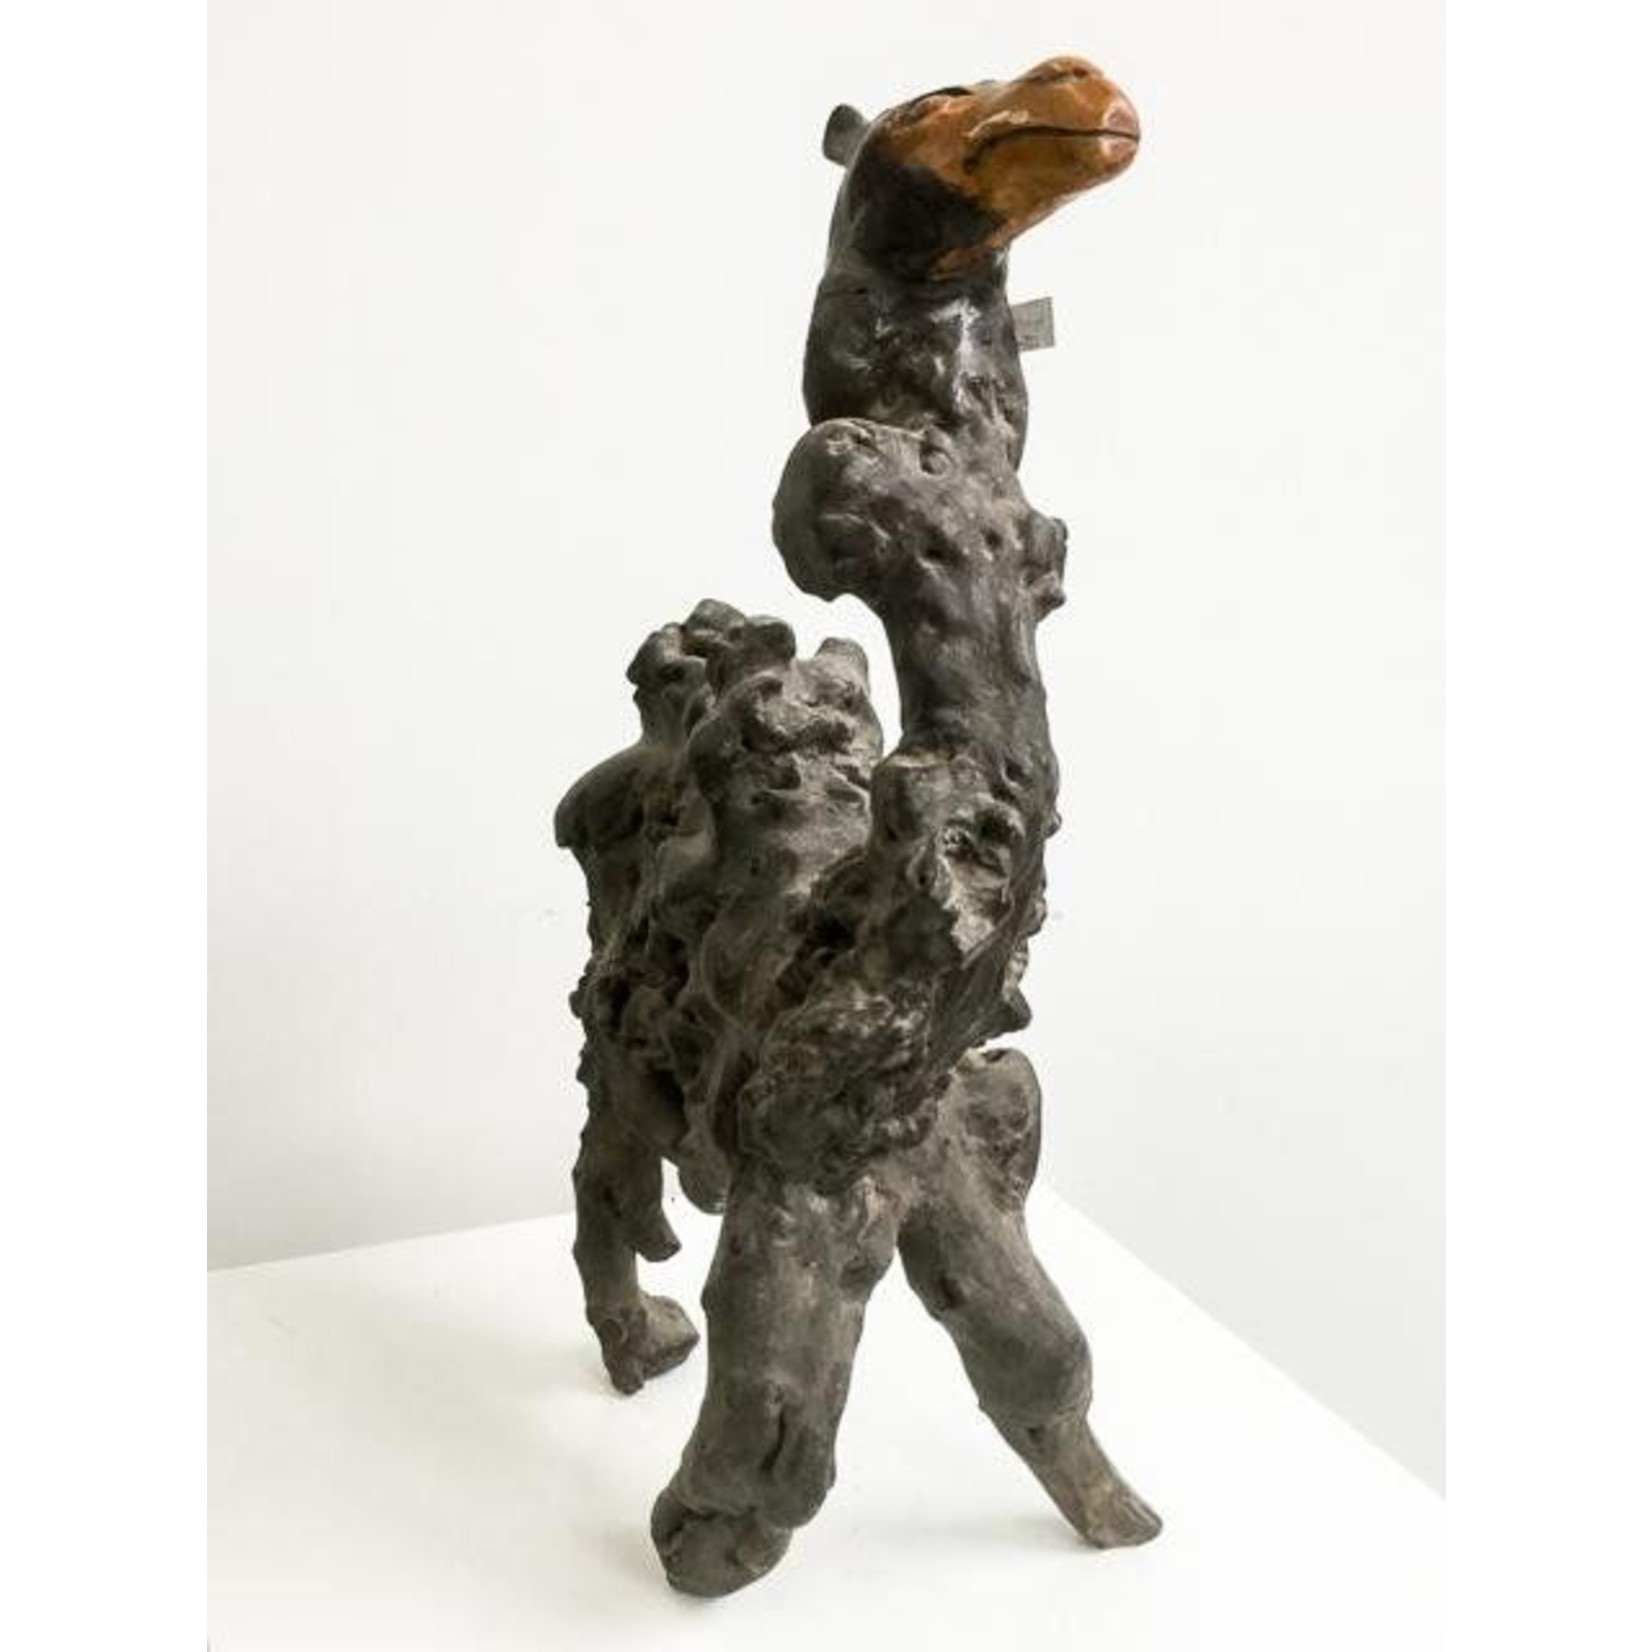 Tree root shaped camel  - Unique wooden sculpture, found in China